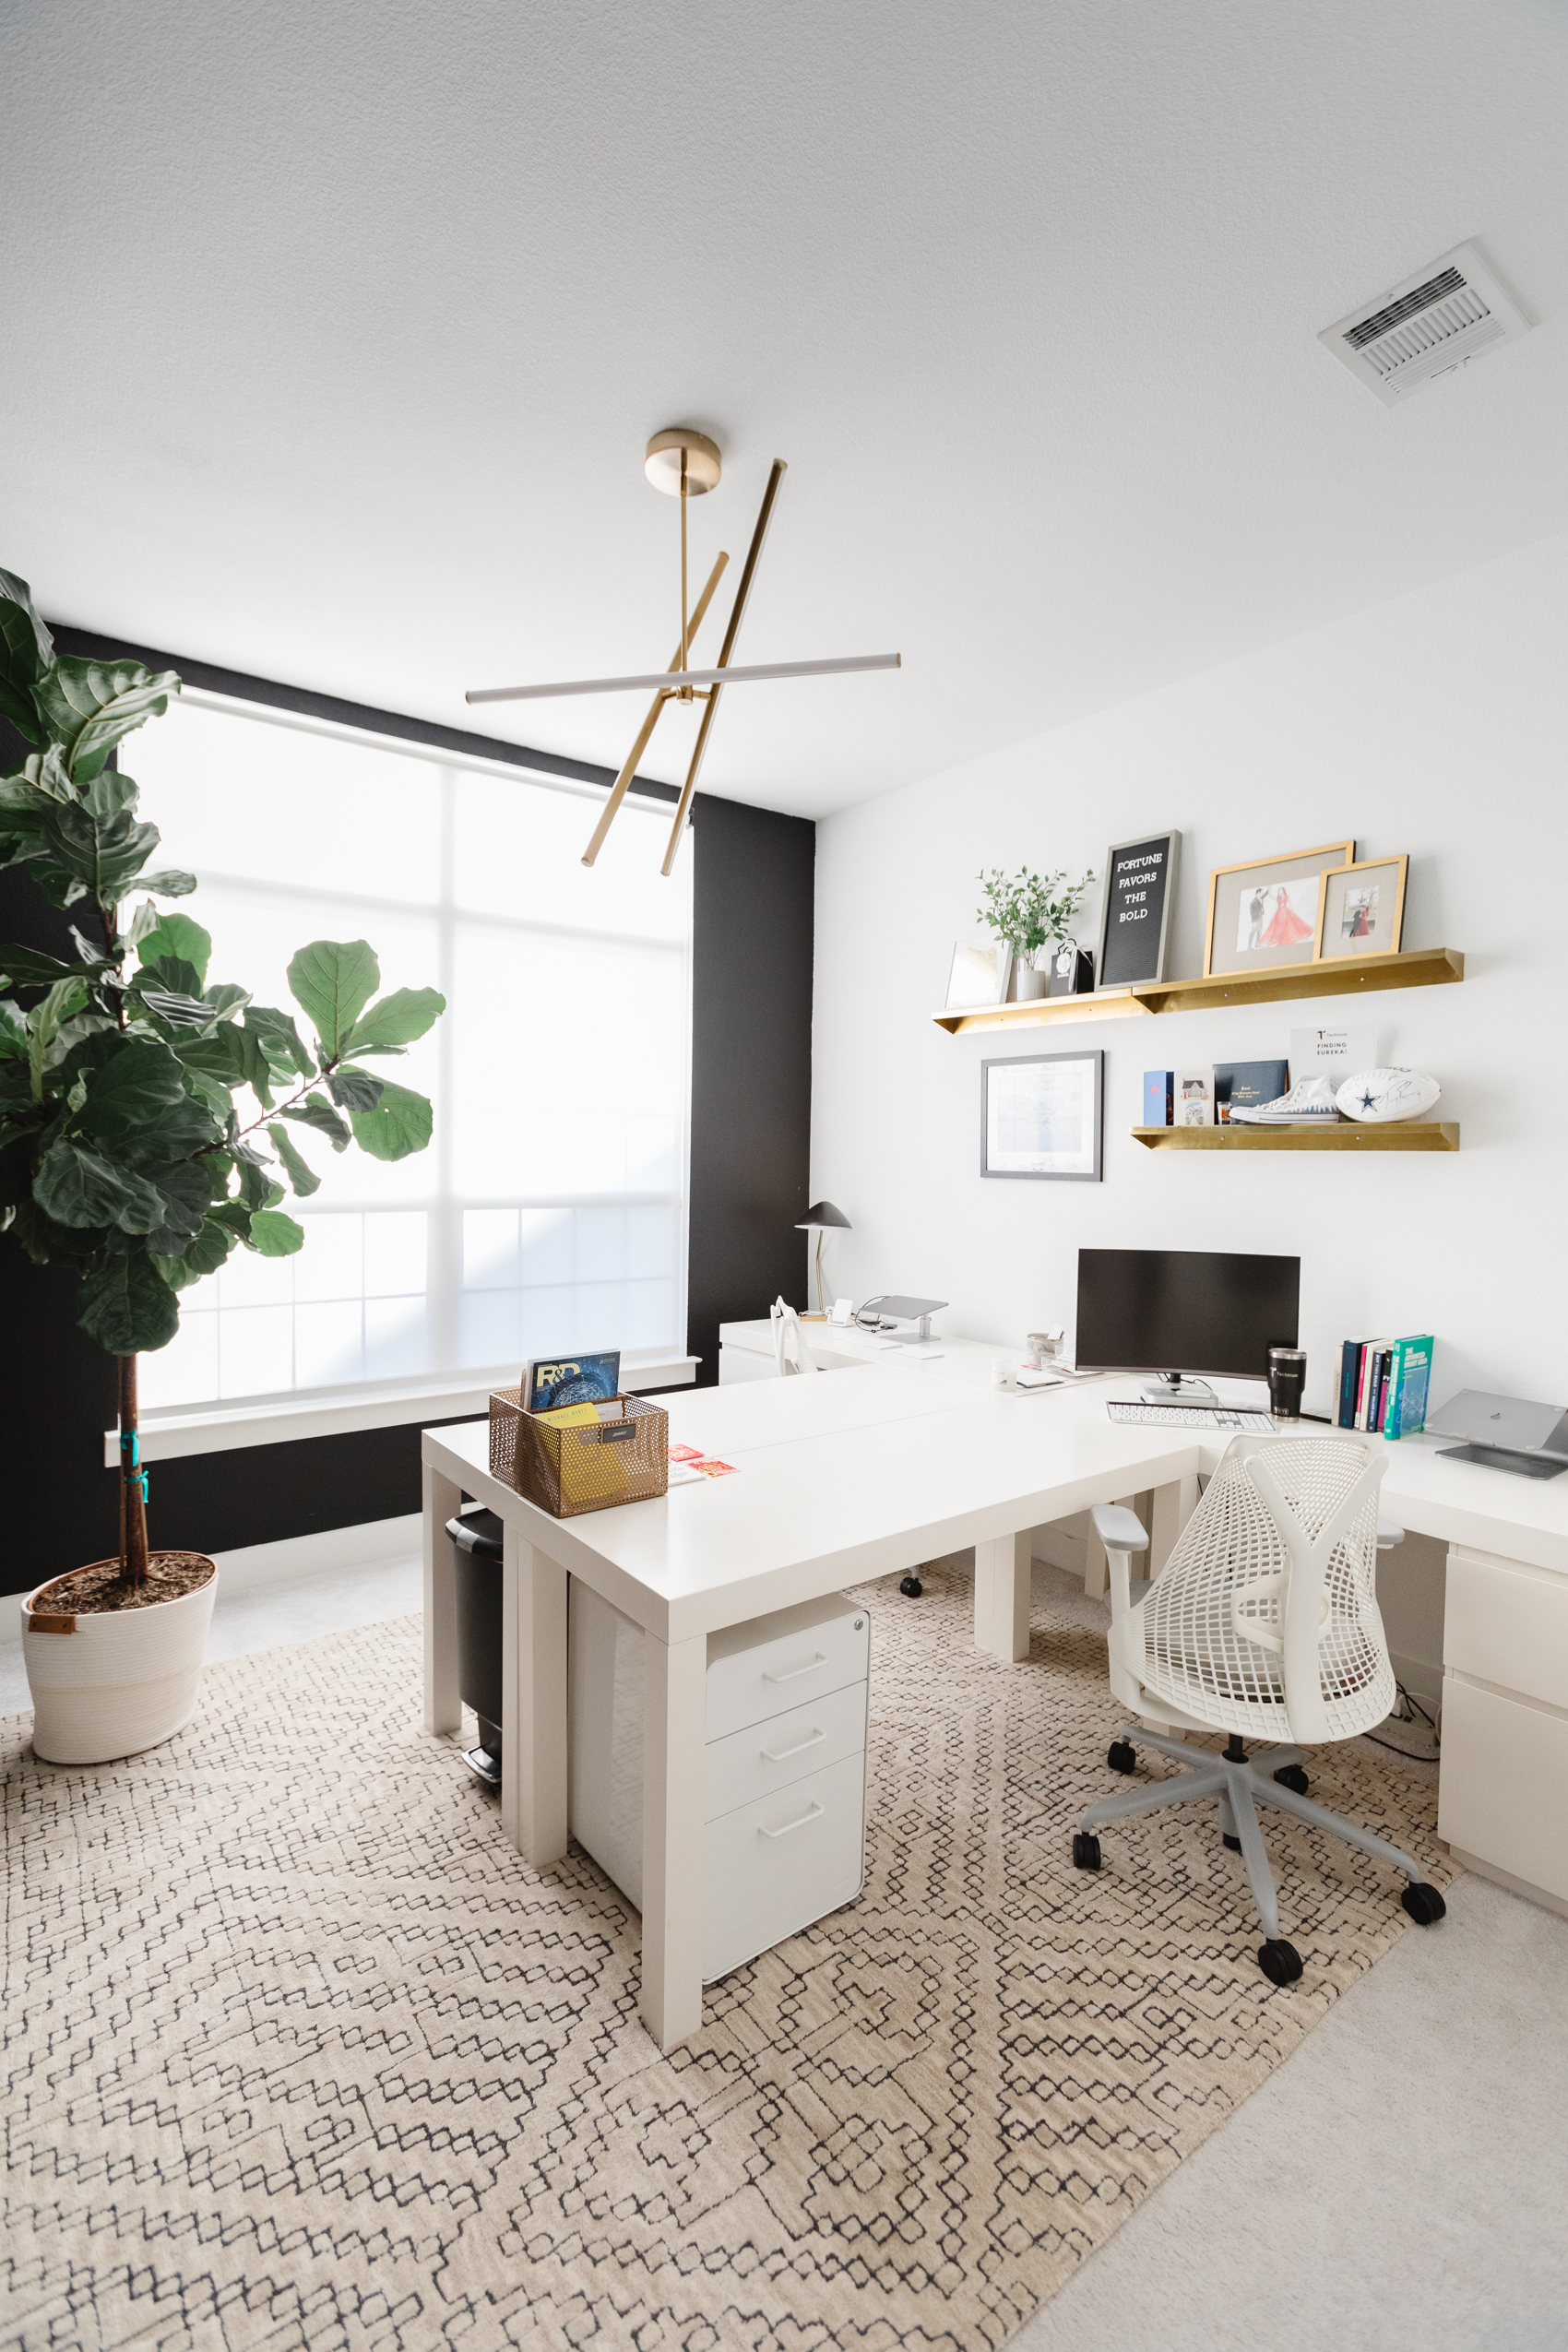 Blogger Hoang-Kim Cung discusses shared home office ideas in her transitional style home including west elm parsons l-shaped desks